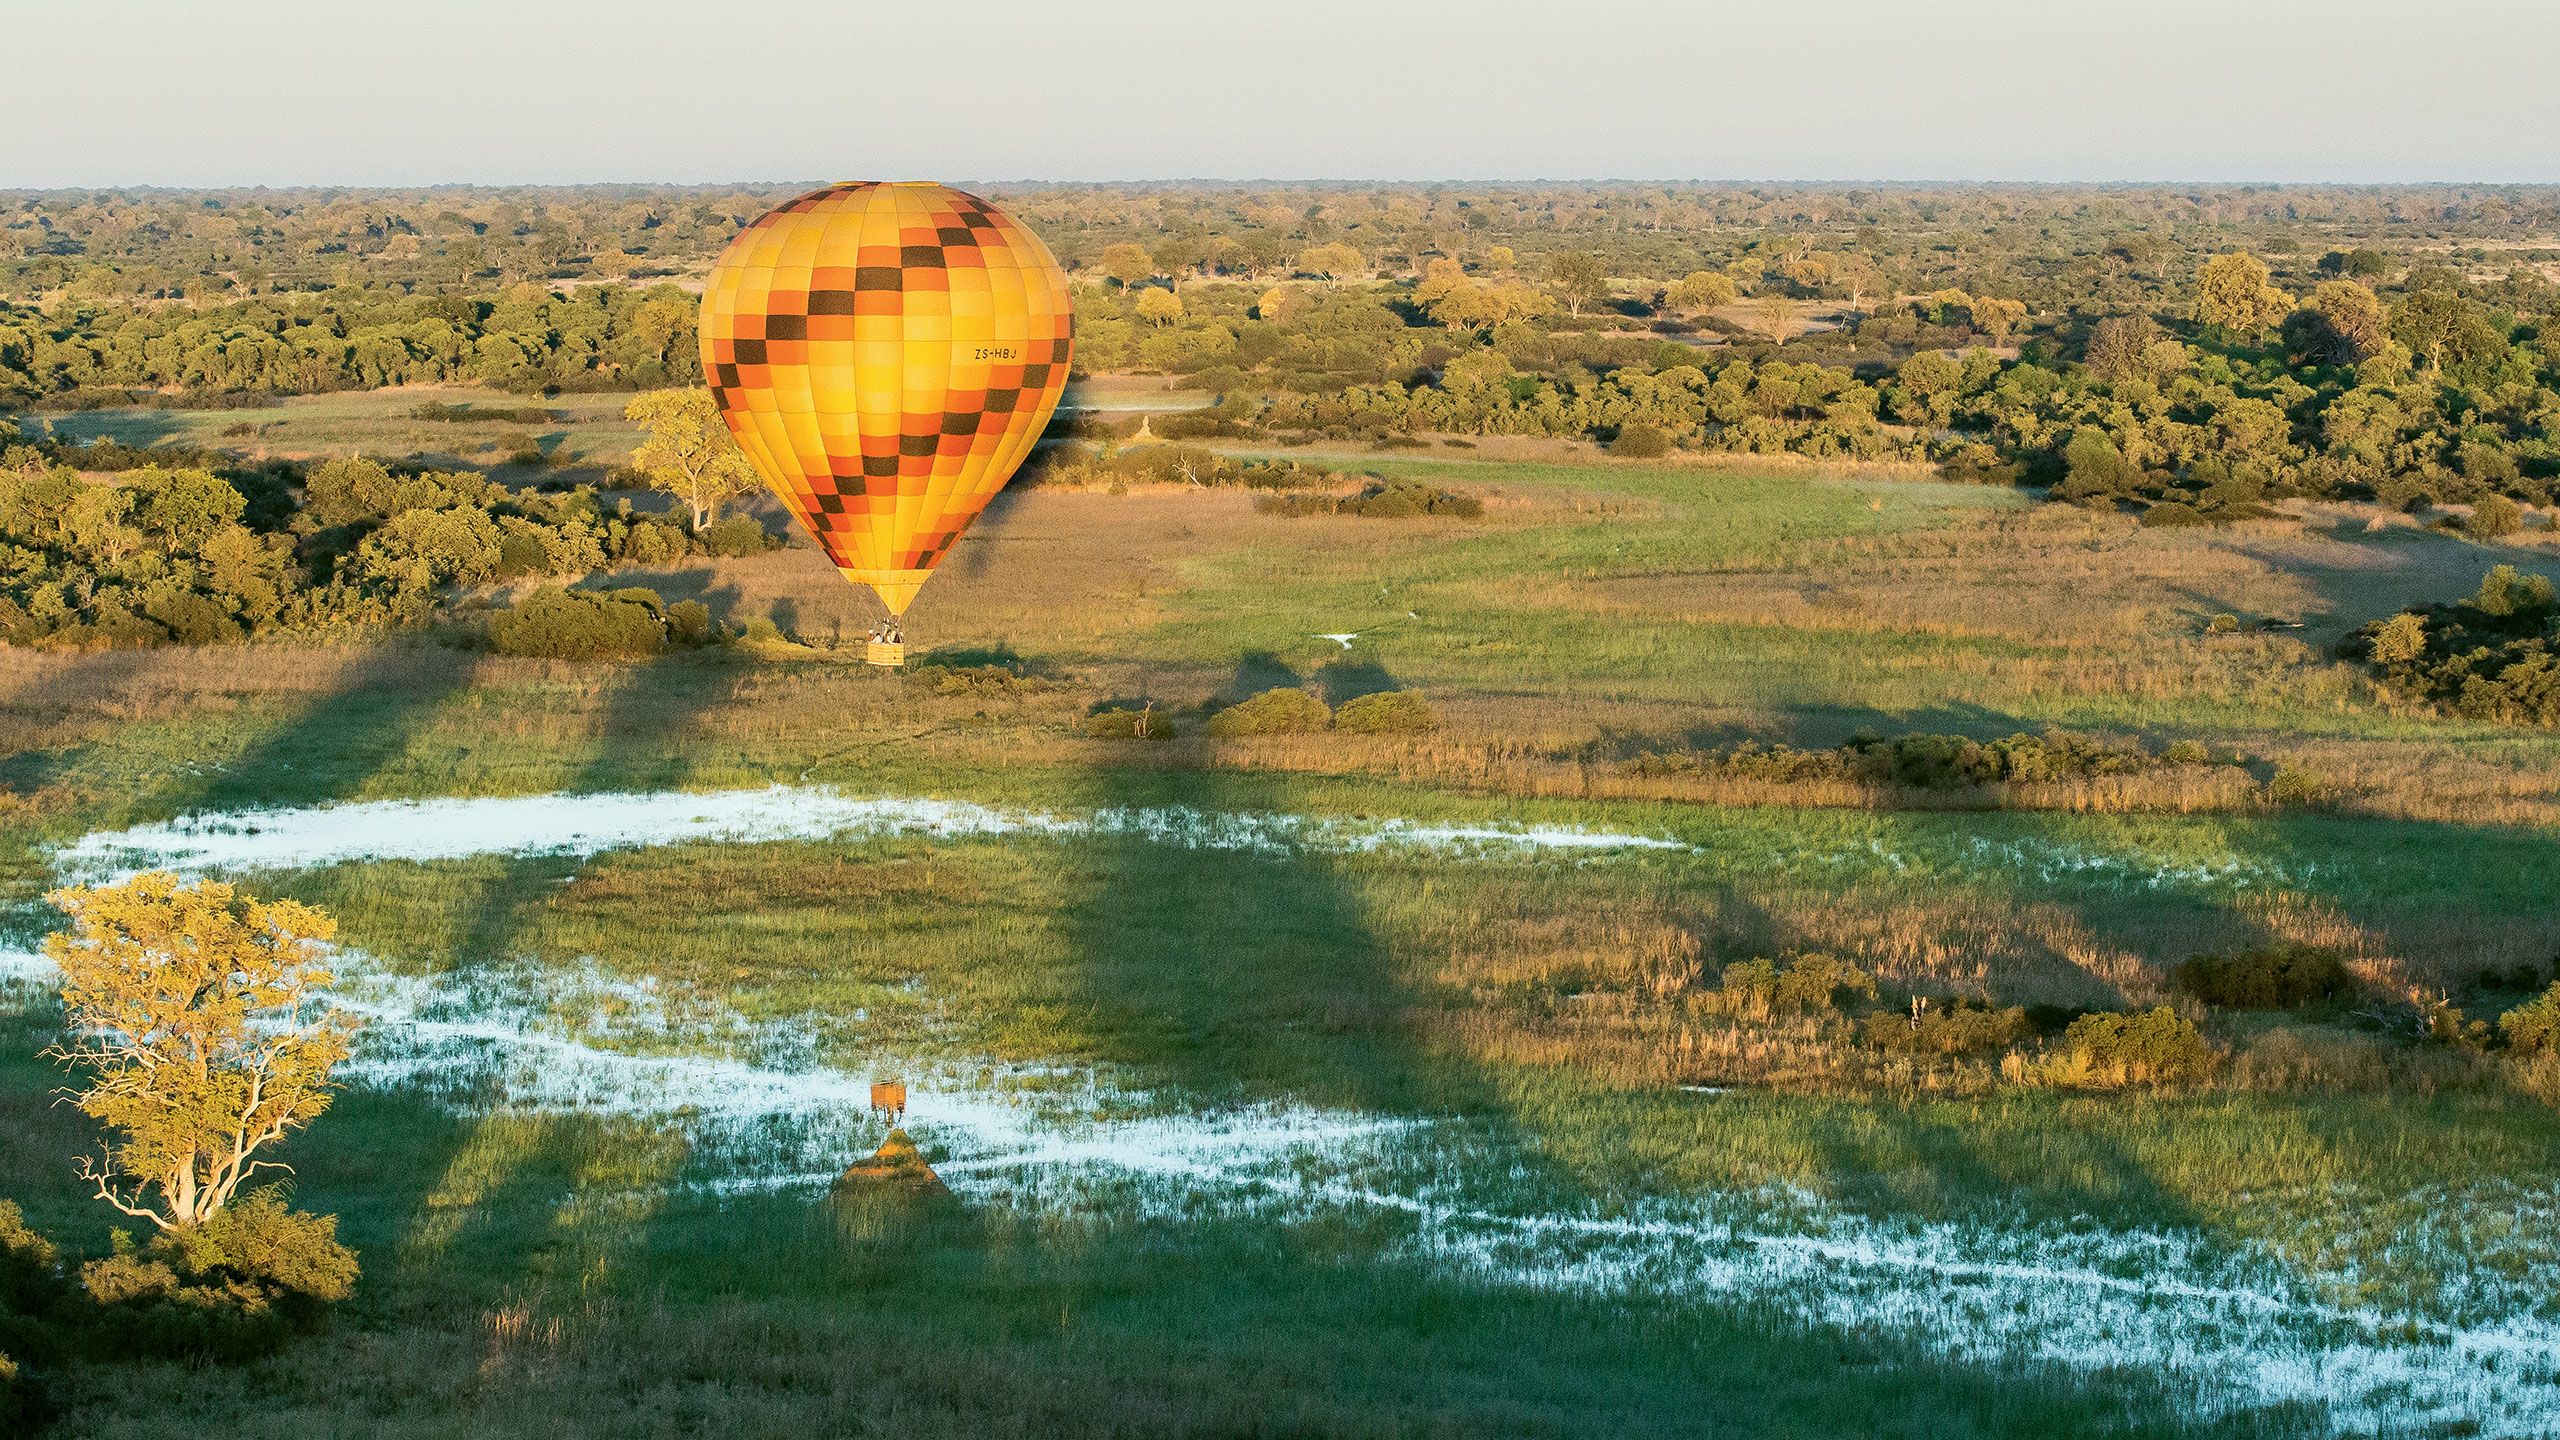 A balloon ride over the Okavango Delta in Botswana is both more exclusive and less intrusive than traditional game drives. Photo courtesy of Wilderness Safaris/Deon de Villiers 